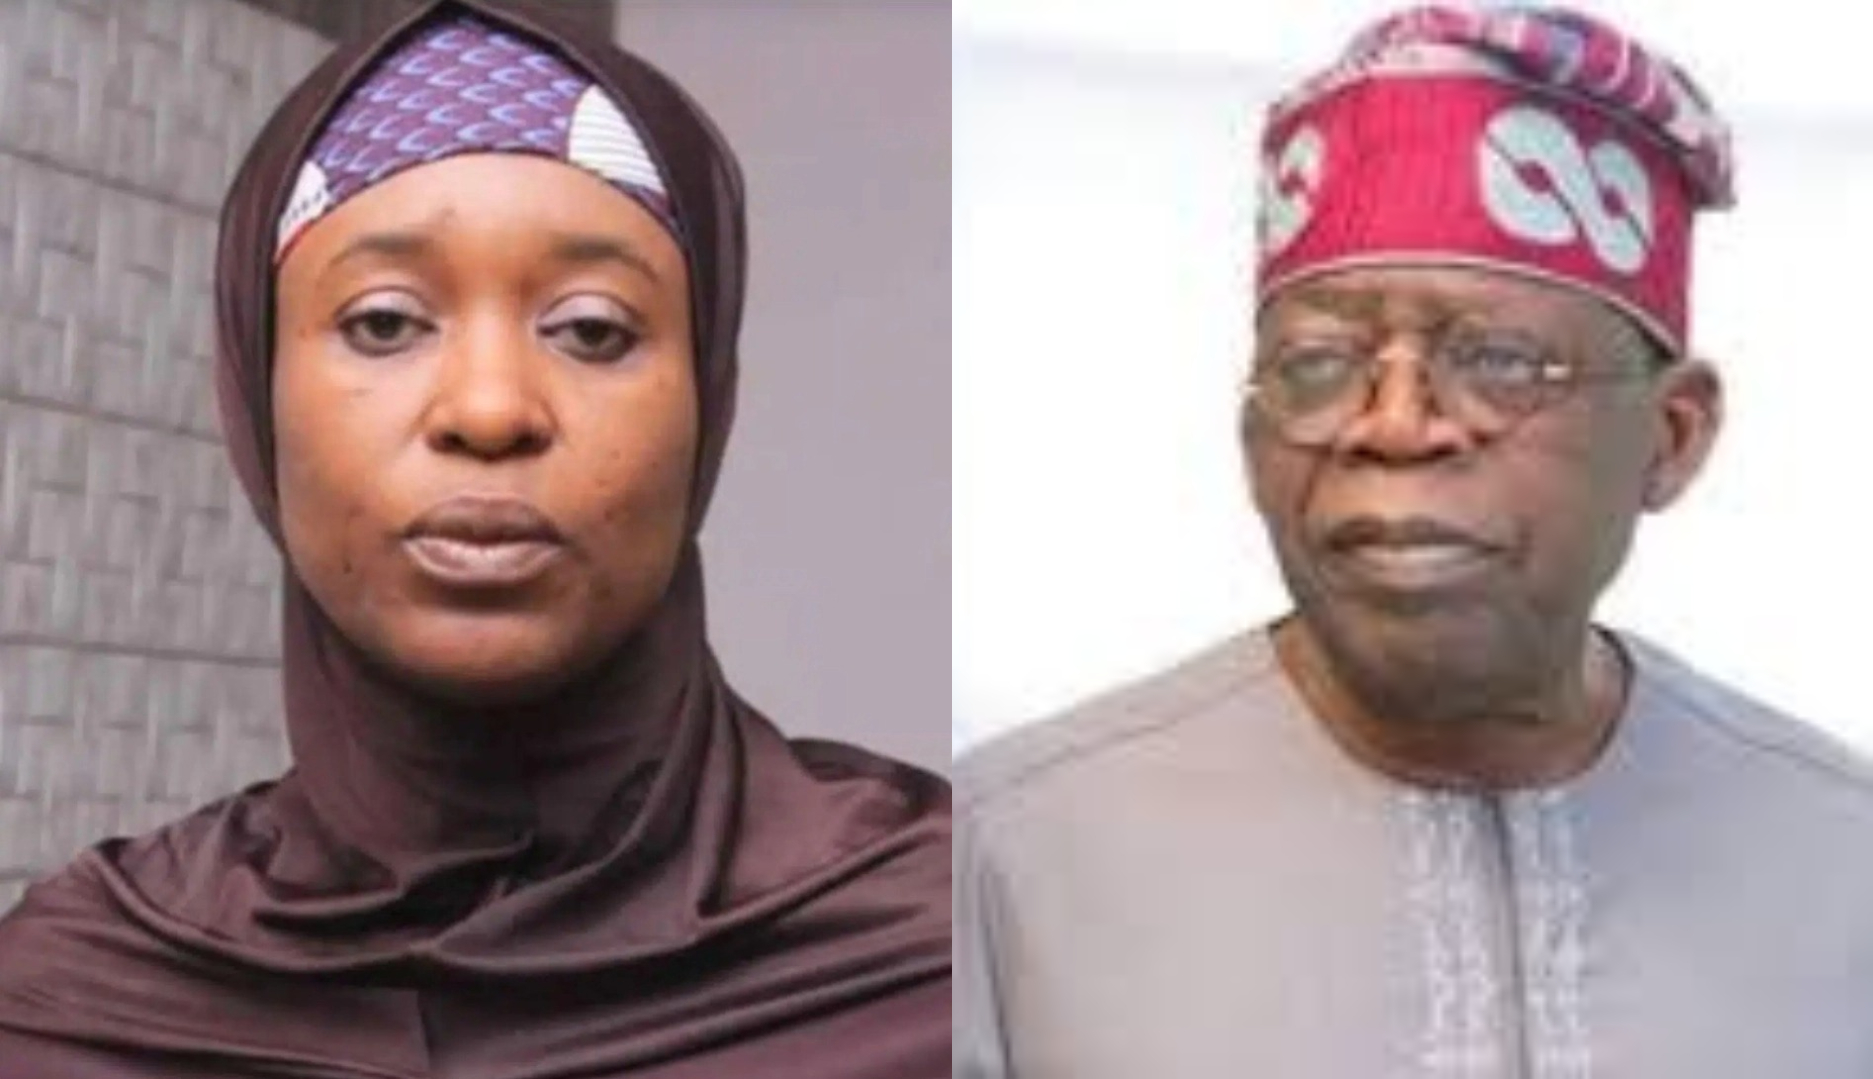 "He is not my President, he rigged his way in" - Activist, Aisha Yesufu to Bola Tinubu